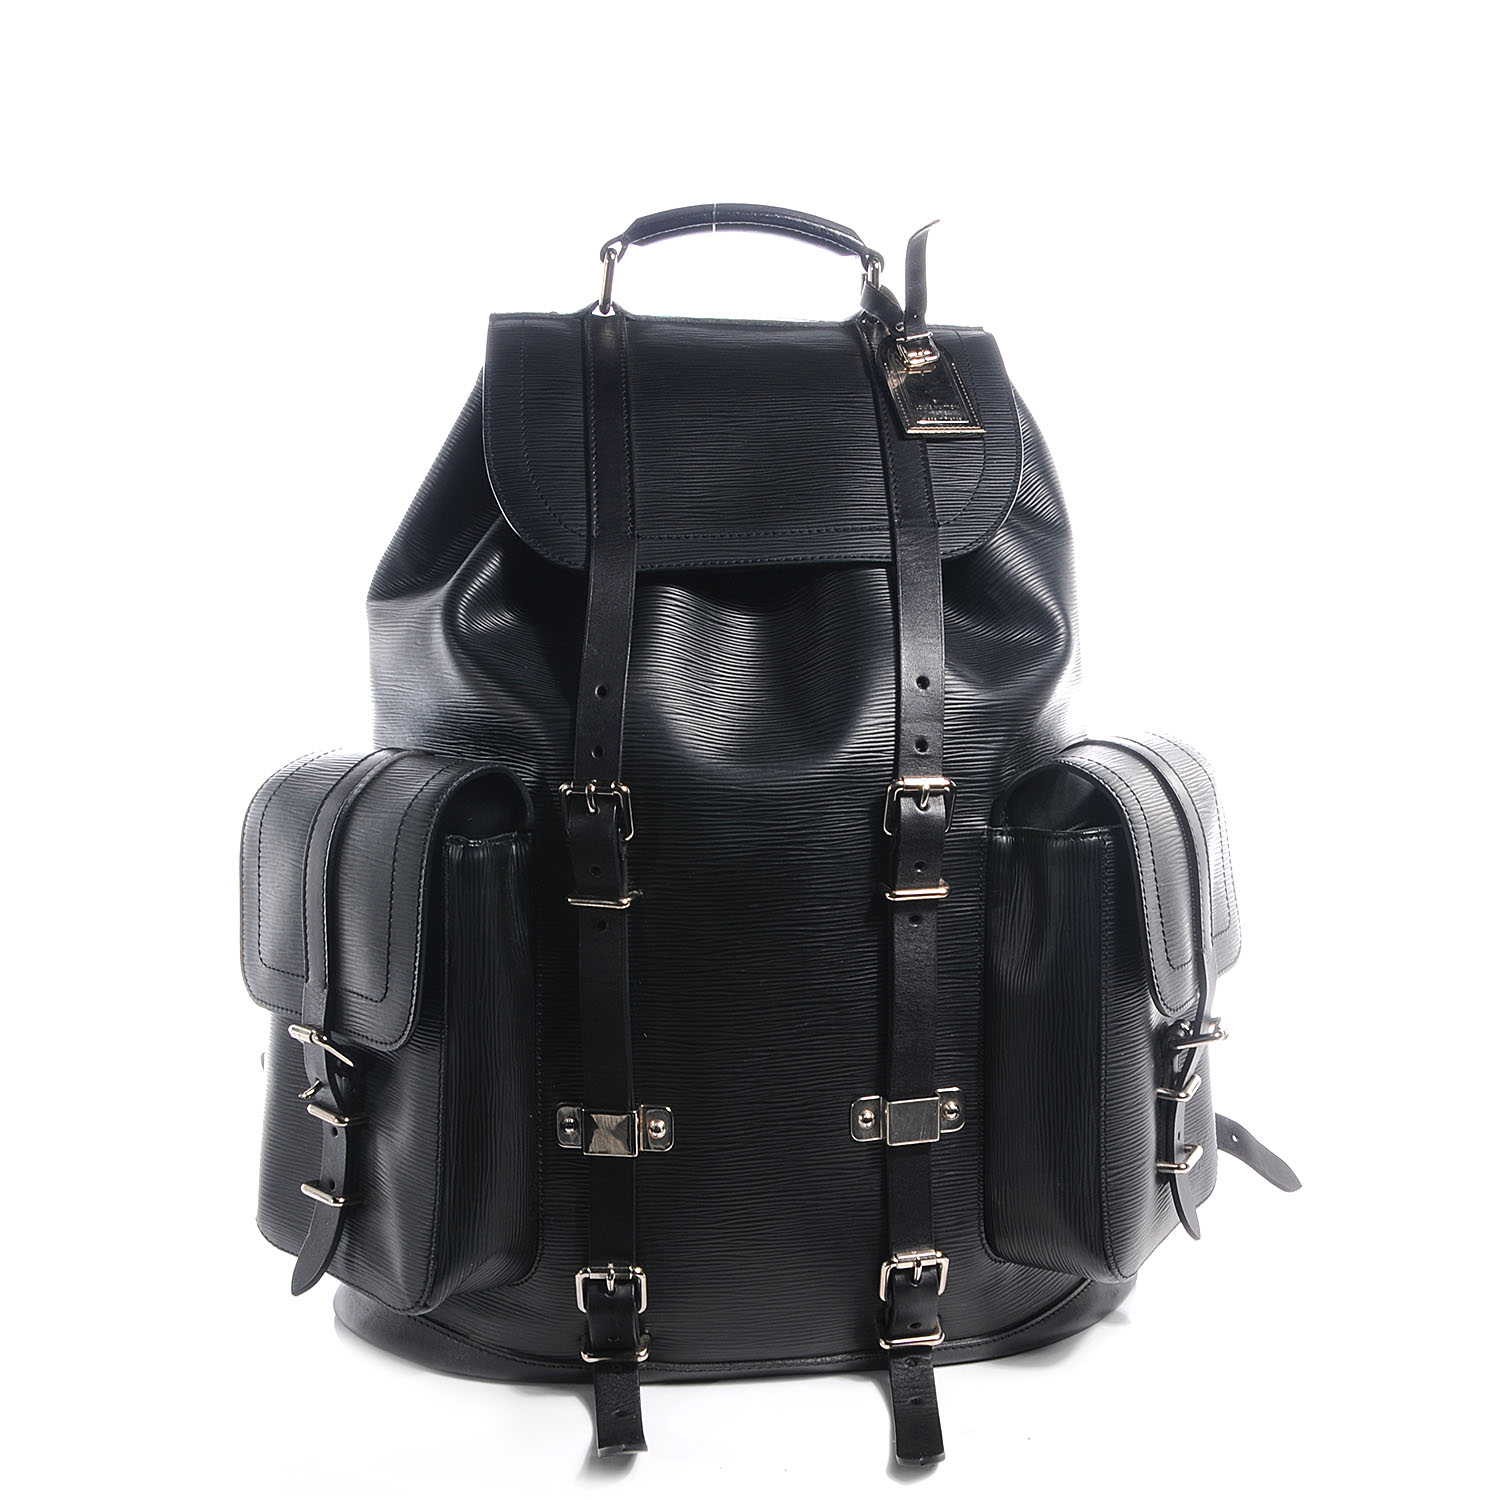 Lv Christopher Backpack Price Chopper | Paul Smith